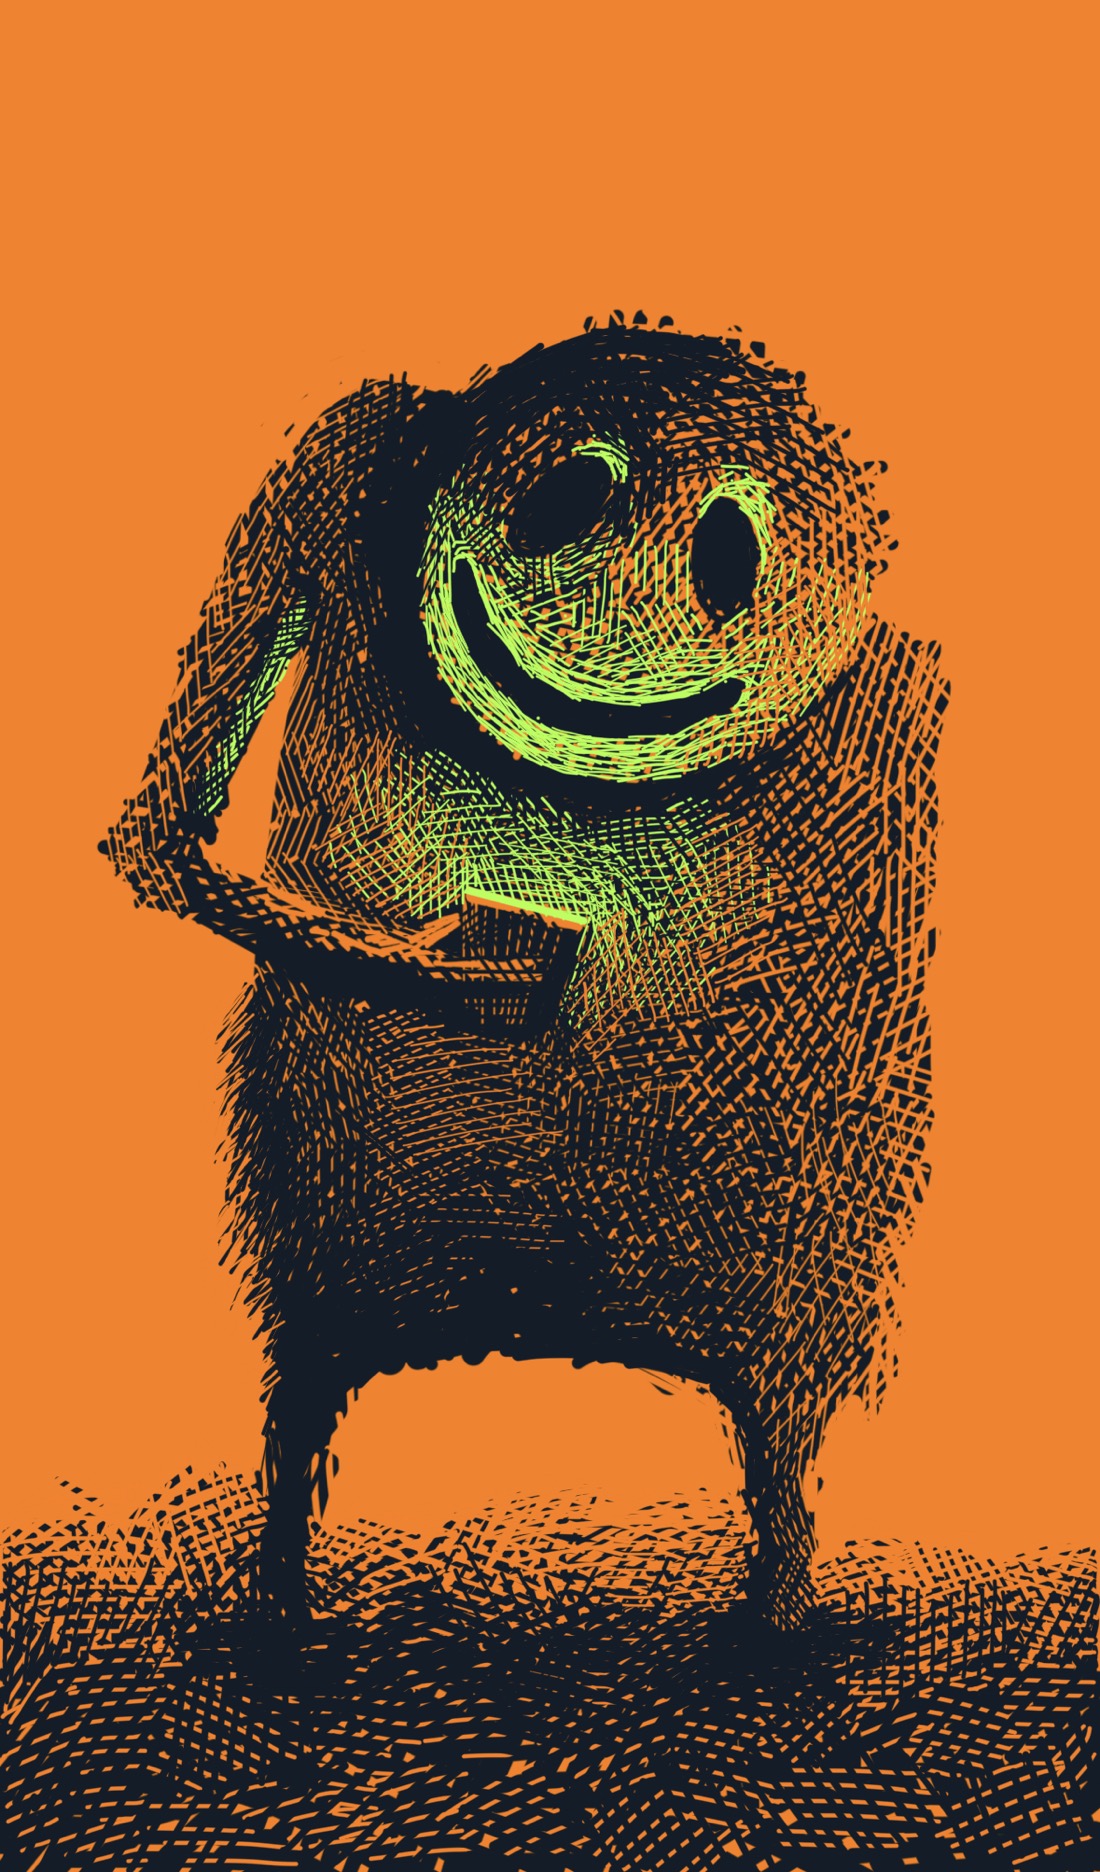 A figure stands looking at its phone. The figure has two short legs, a heavy barrel-shaped body, and a face that looks like a smiley-face mask. The face is lit eerily from below with green light from the phone screen. There are no background details, and the ground is hazy in a way that suggests the figure is standing in front of fog.